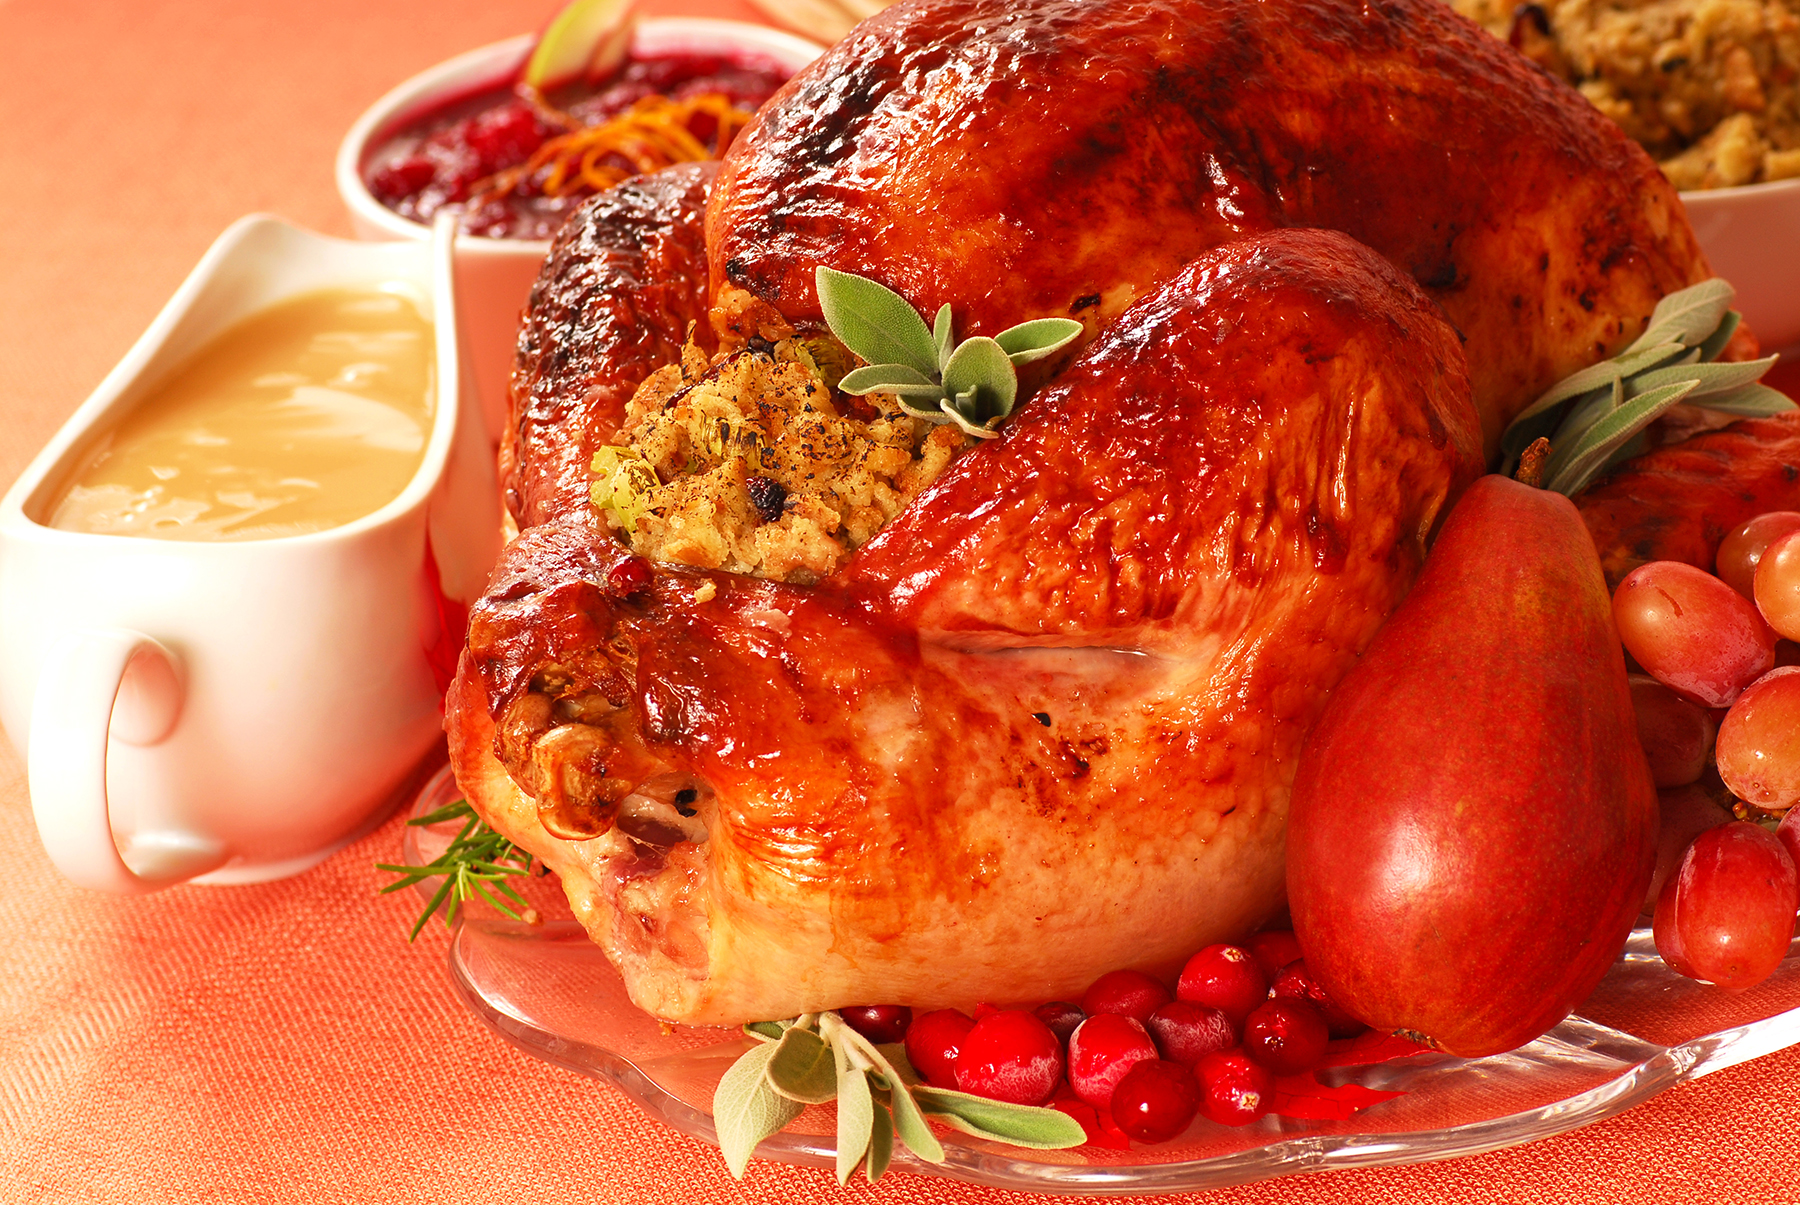 Turkey with stuffing, gravy, cranberry sauce with fresh fruit